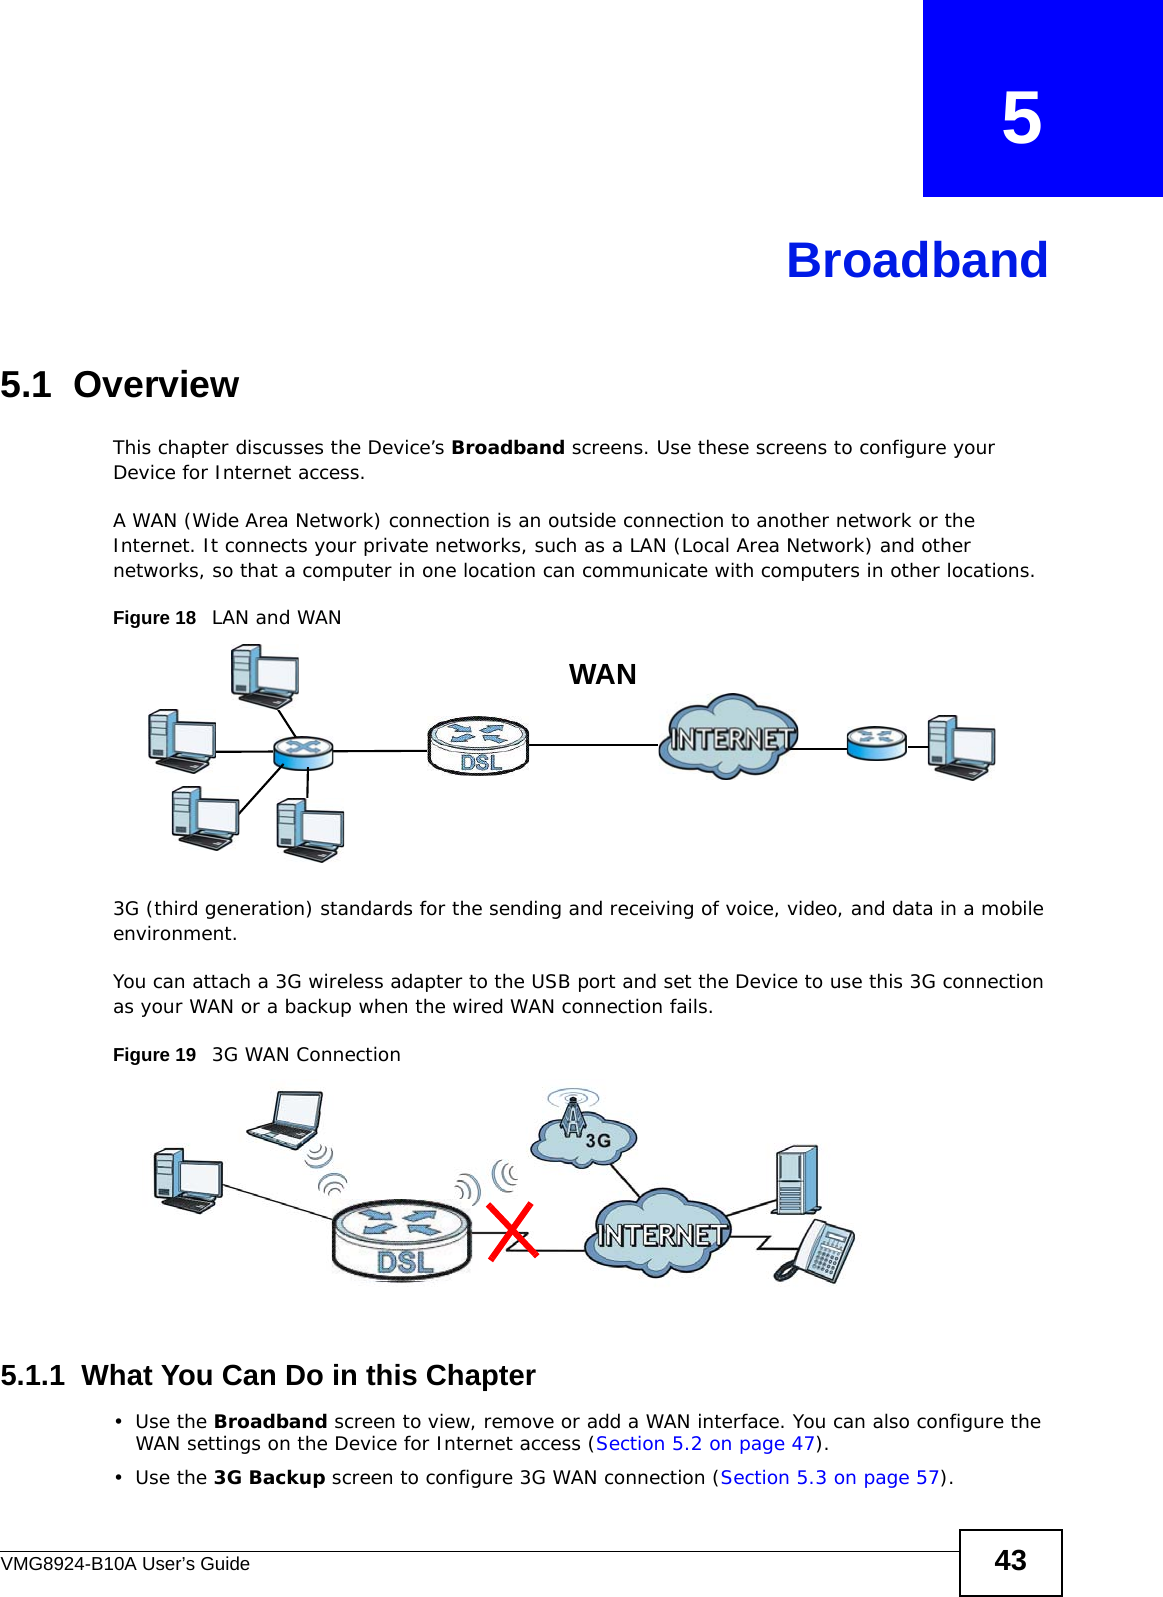 VMG8924-B10A User’s Guide 43CHAPTER   5Broadband5.1  OverviewThis chapter discusses the Device’s Broadband screens. Use these screens to configure your Device for Internet access.A WAN (Wide Area Network) connection is an outside connection to another network or the Internet. It connects your private networks, such as a LAN (Local Area Network) and other networks, so that a computer in one location can communicate with computers in other locations.Figure 18   LAN and WAN3G (third generation) standards for the sending and receiving of voice, video, and data in a mobile environment. You can attach a 3G wireless adapter to the USB port and set the Device to use this 3G connection as your WAN or a backup when the wired WAN connection fails.Figure 19   3G WAN Connection 5.1.1  What You Can Do in this Chapter•Use the Broadband screen to view, remove or add a WAN interface. You can also configure the WAN settings on the Device for Internet access (Section 5.2 on page 47).•Use the 3G Backup screen to configure 3G WAN connection (Section 5.3 on page 57). WAN